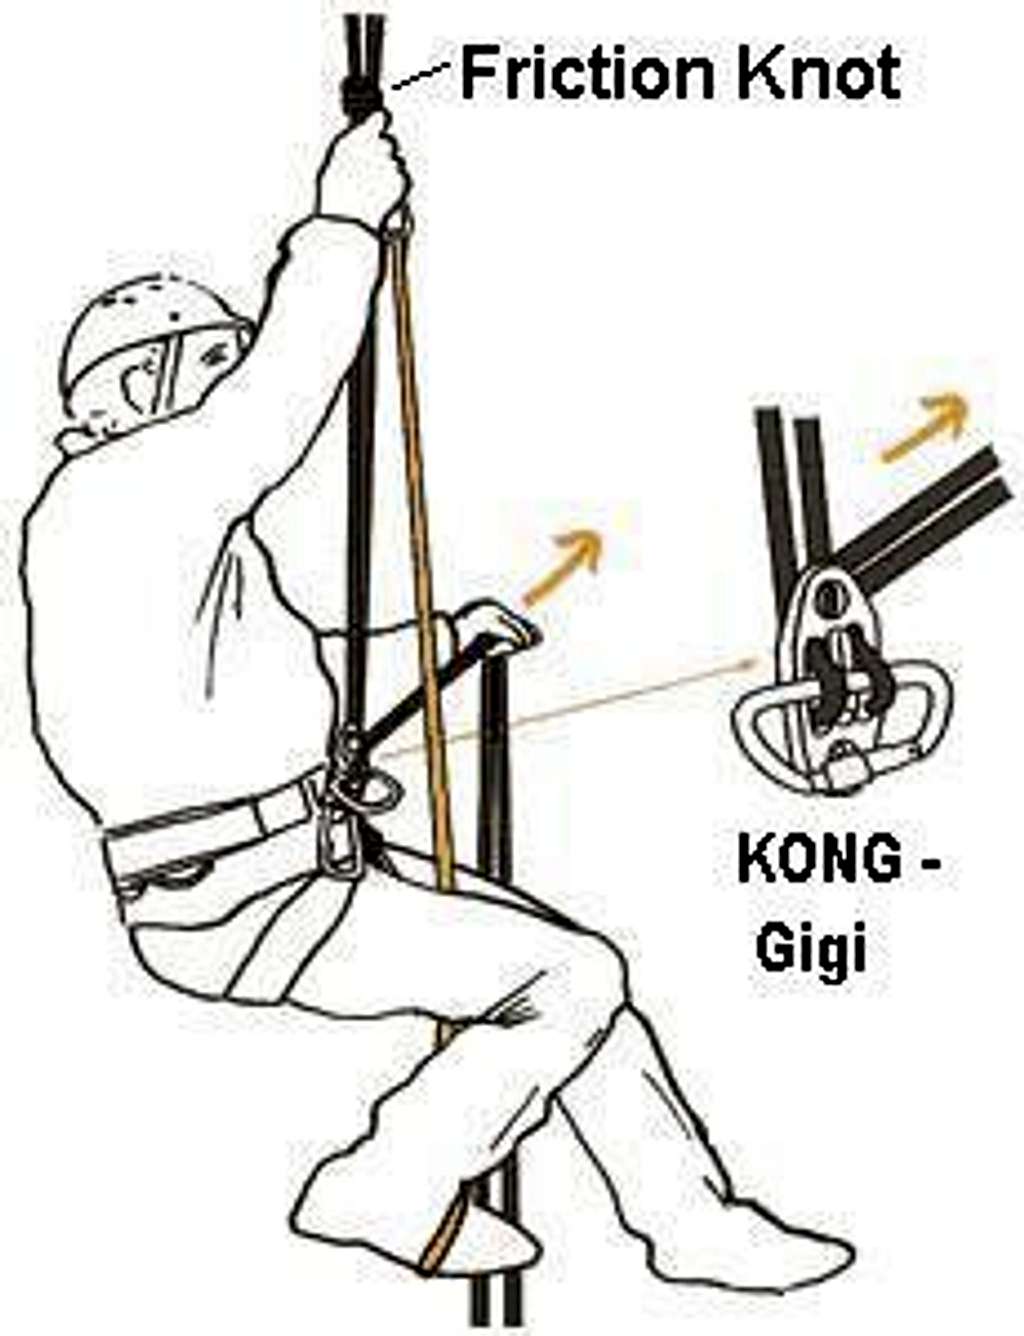 Ascending w.Friction knot and KONG-Gigi